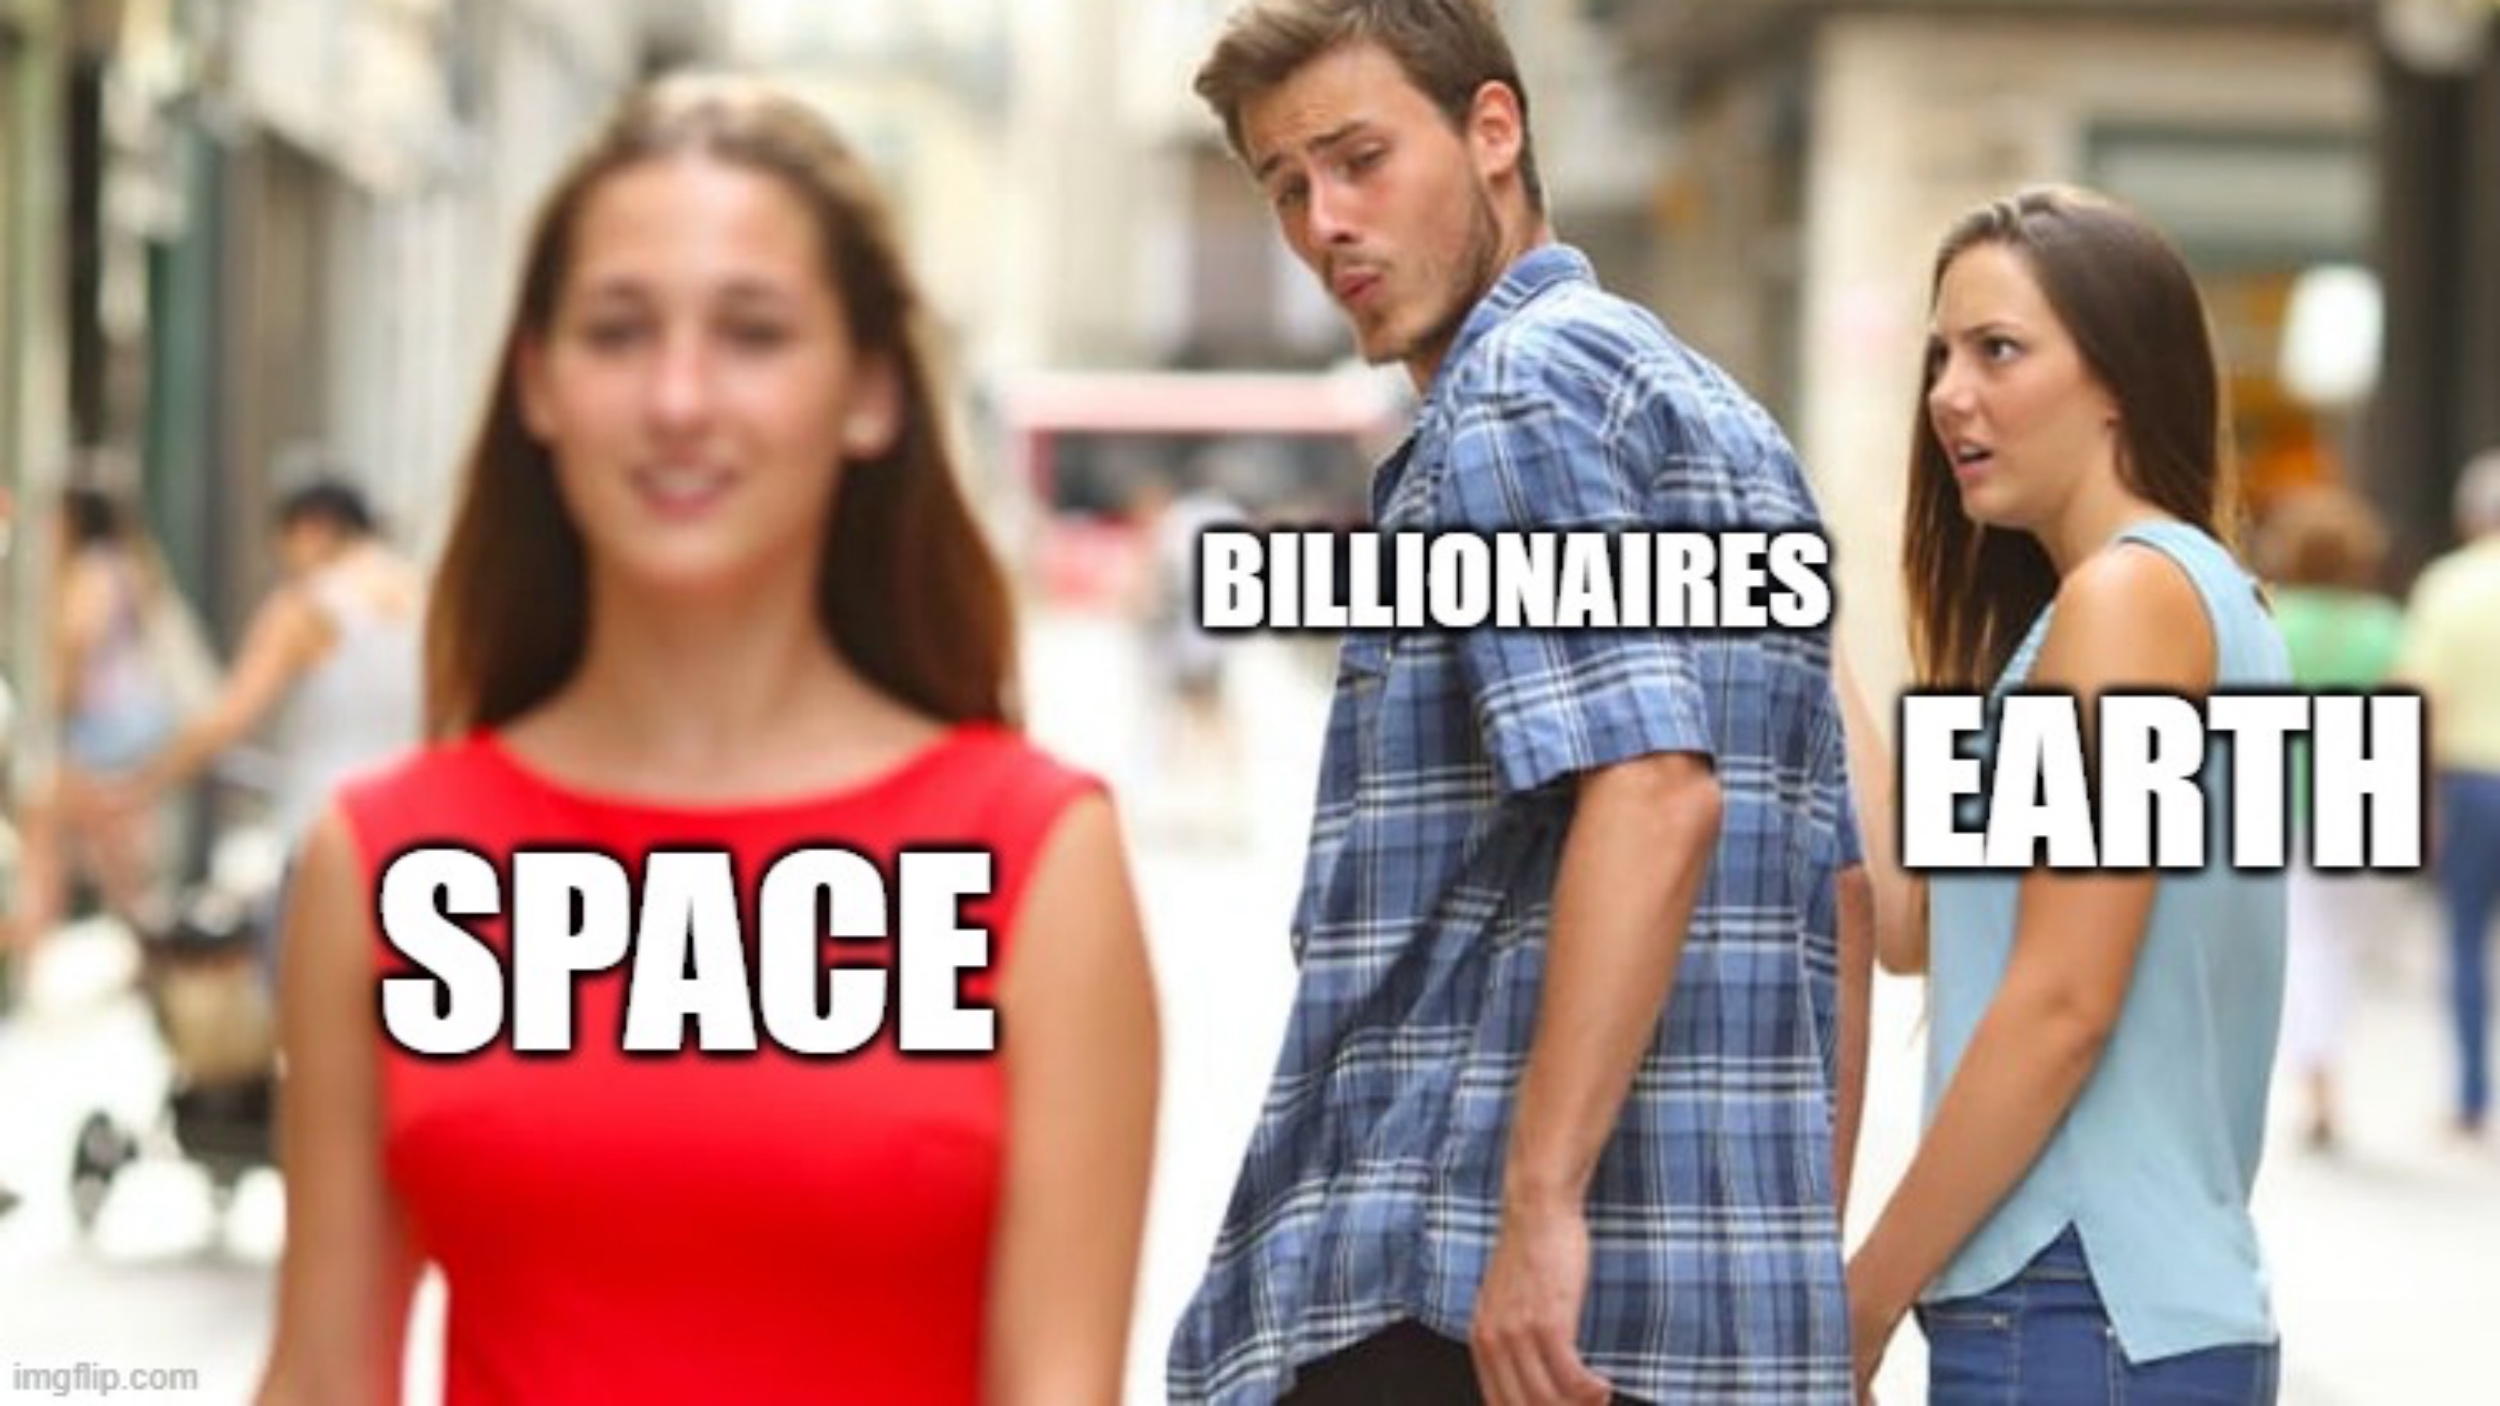 funny meme about billionaires and space